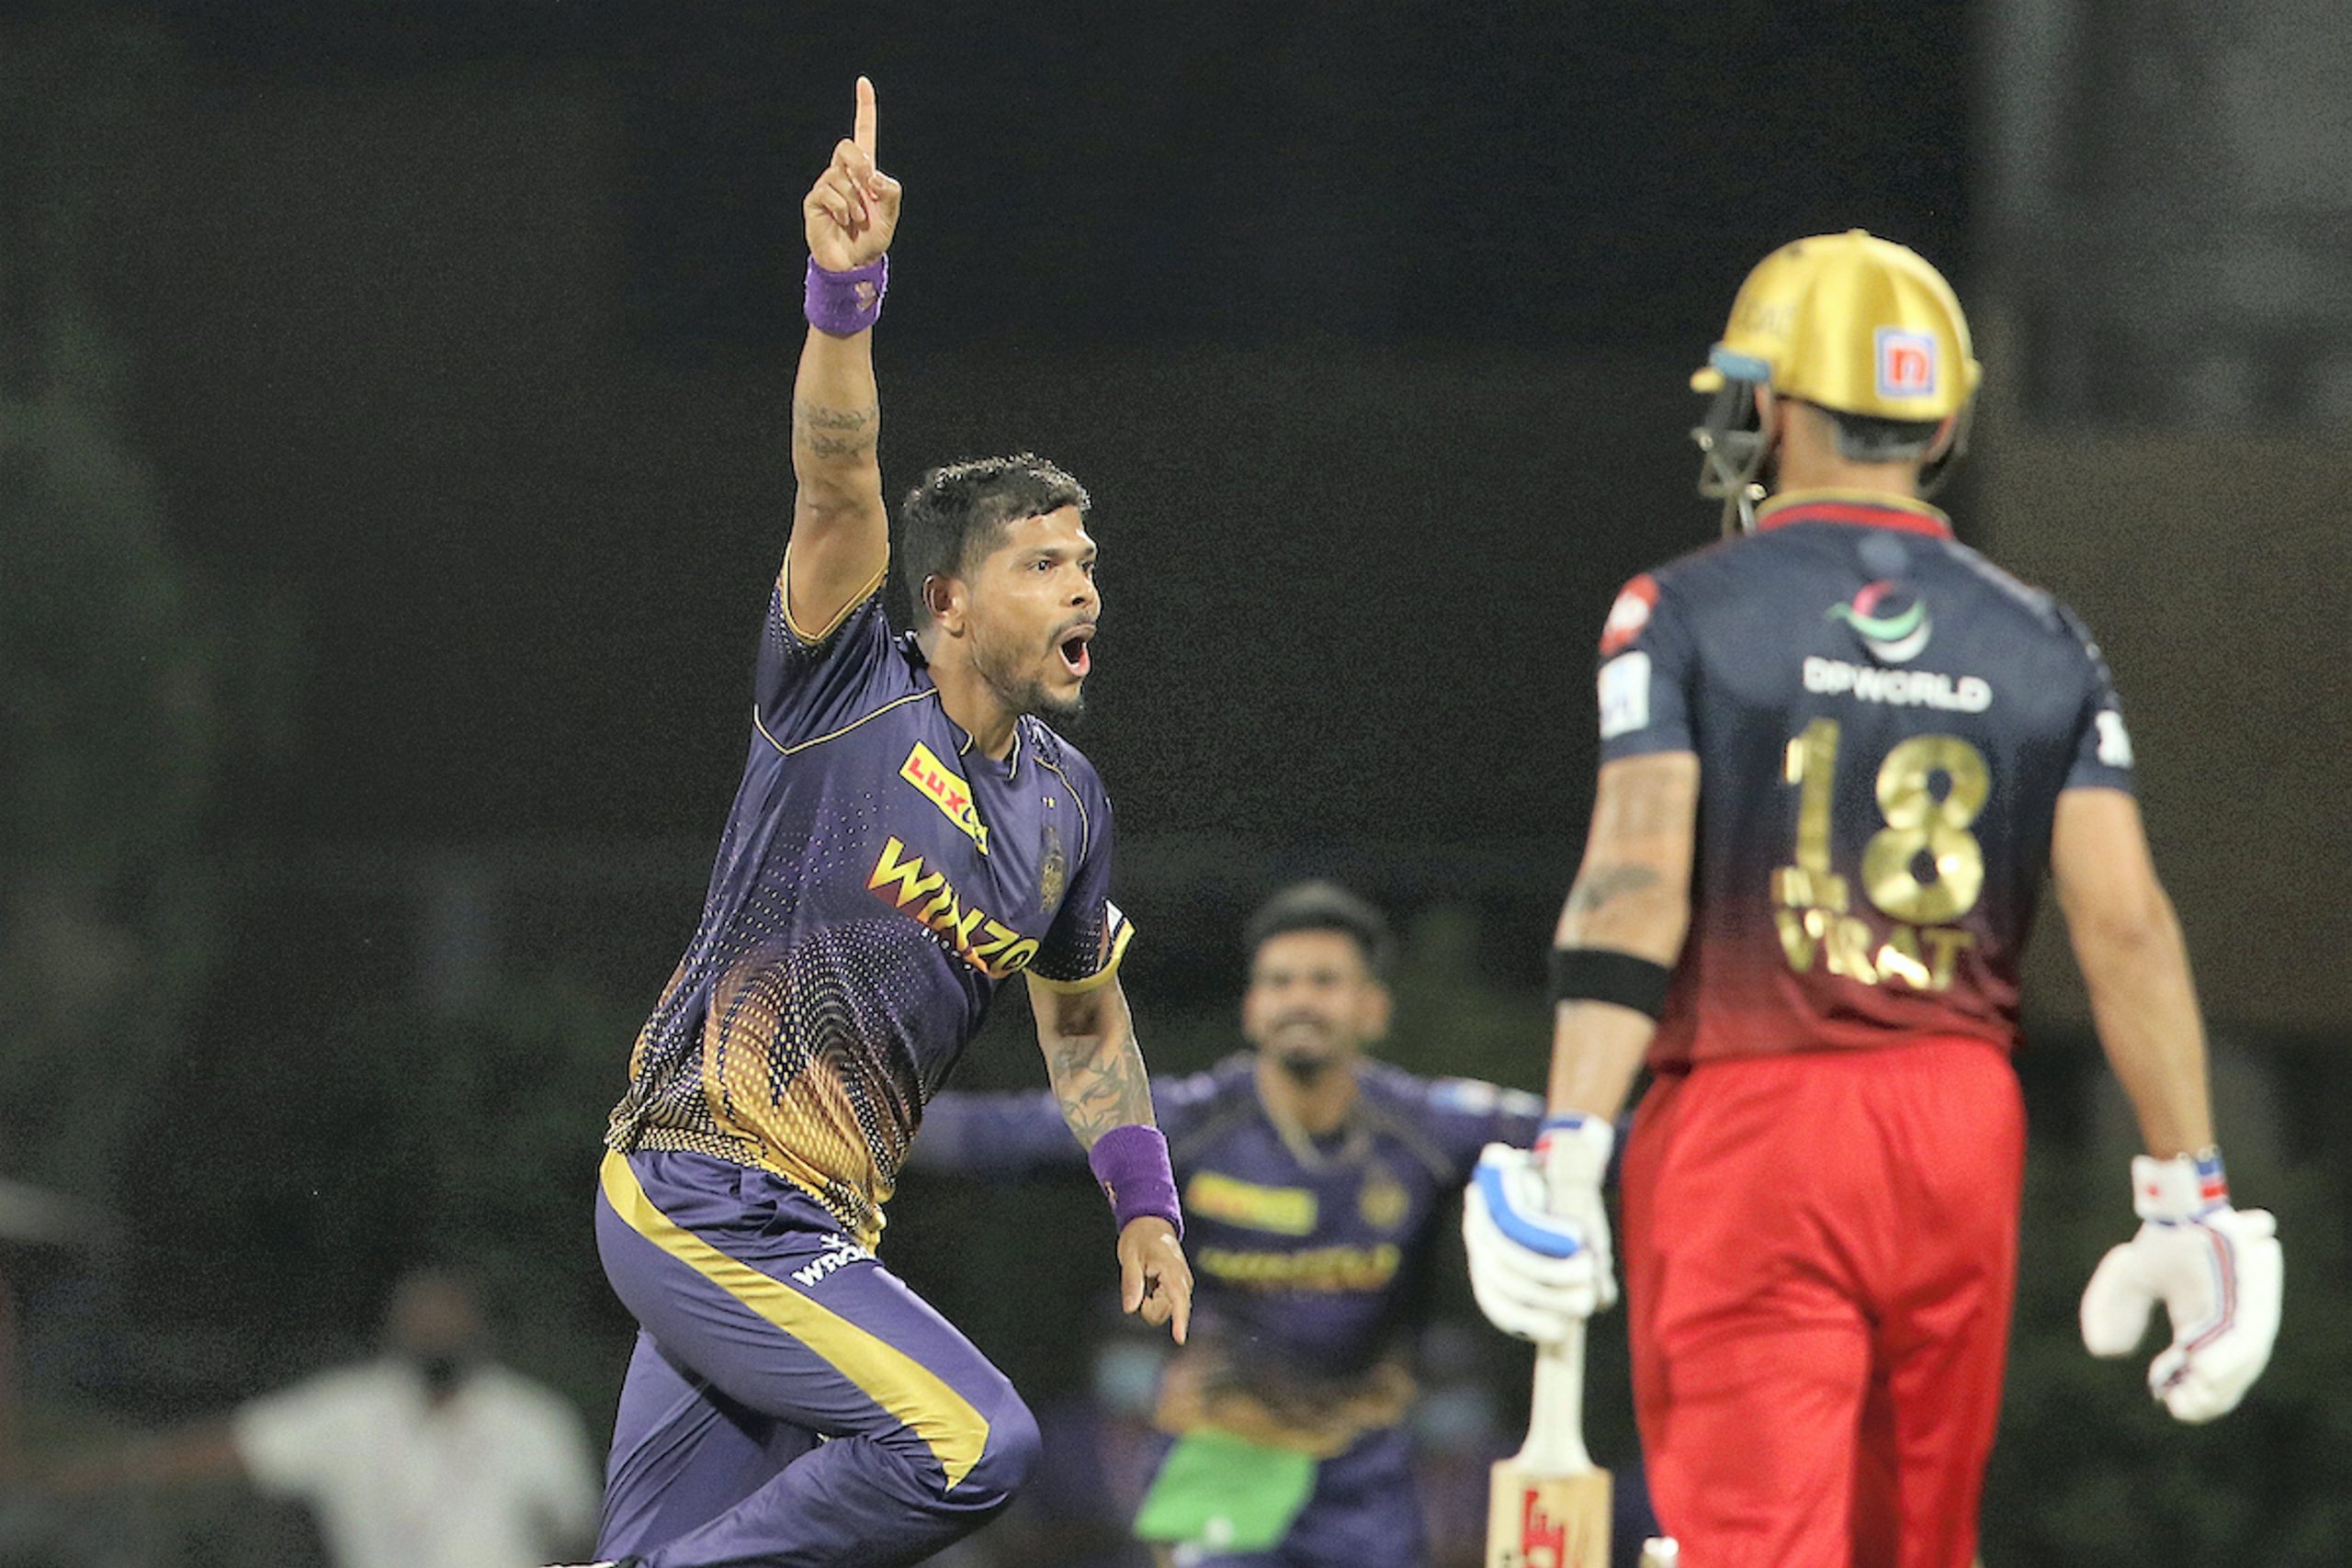 What next for Umesh Yadav? KKR pacer sets goals ahead of T20 World Cup